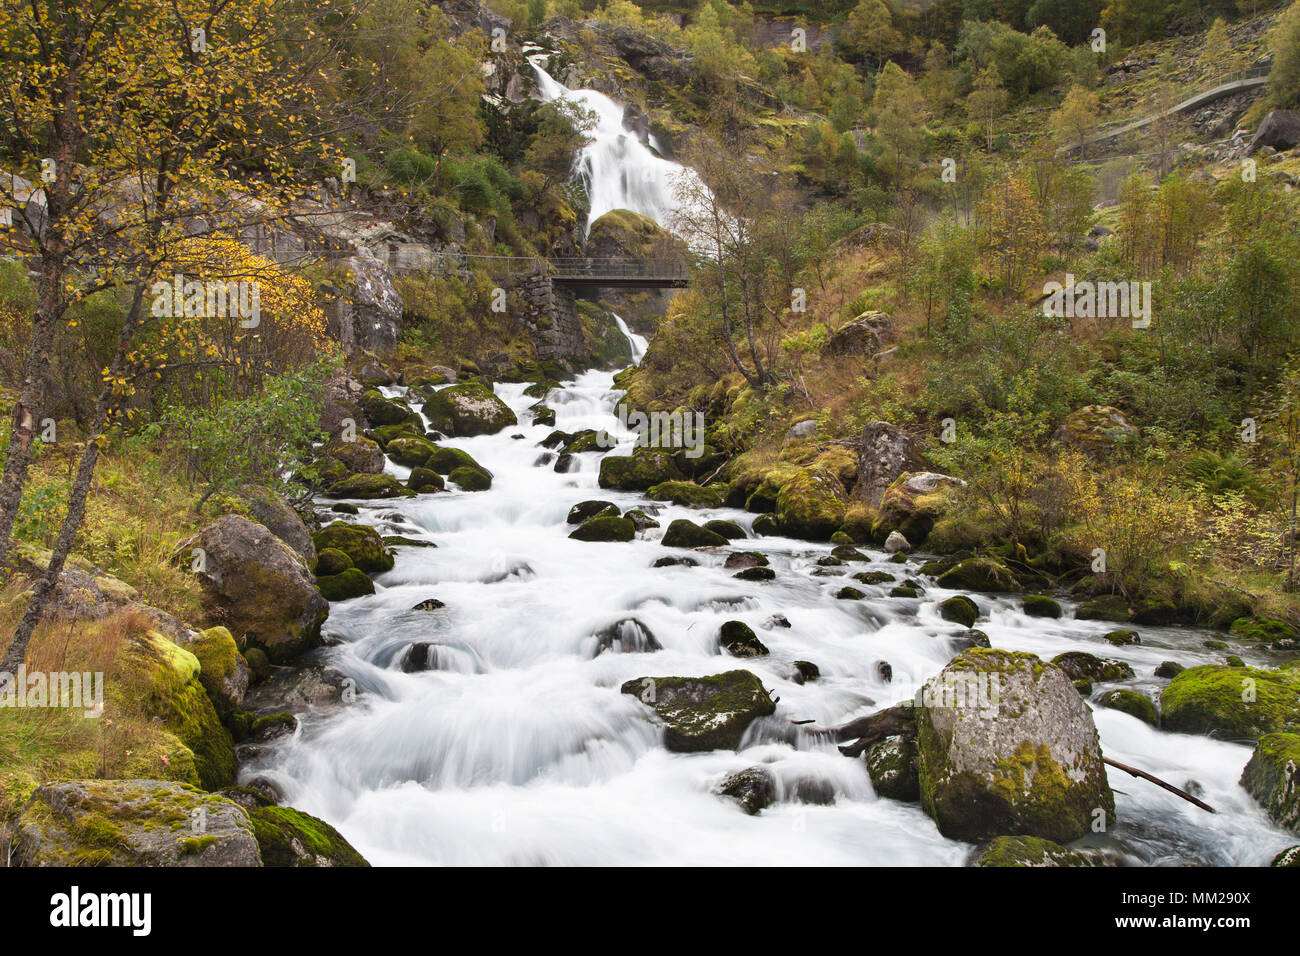 River Briksdalselva and the Kleivafossen Waterfall in the background, Jostedalsbreen National Park, Sogn og Fjordane, Norway. Stock Photo